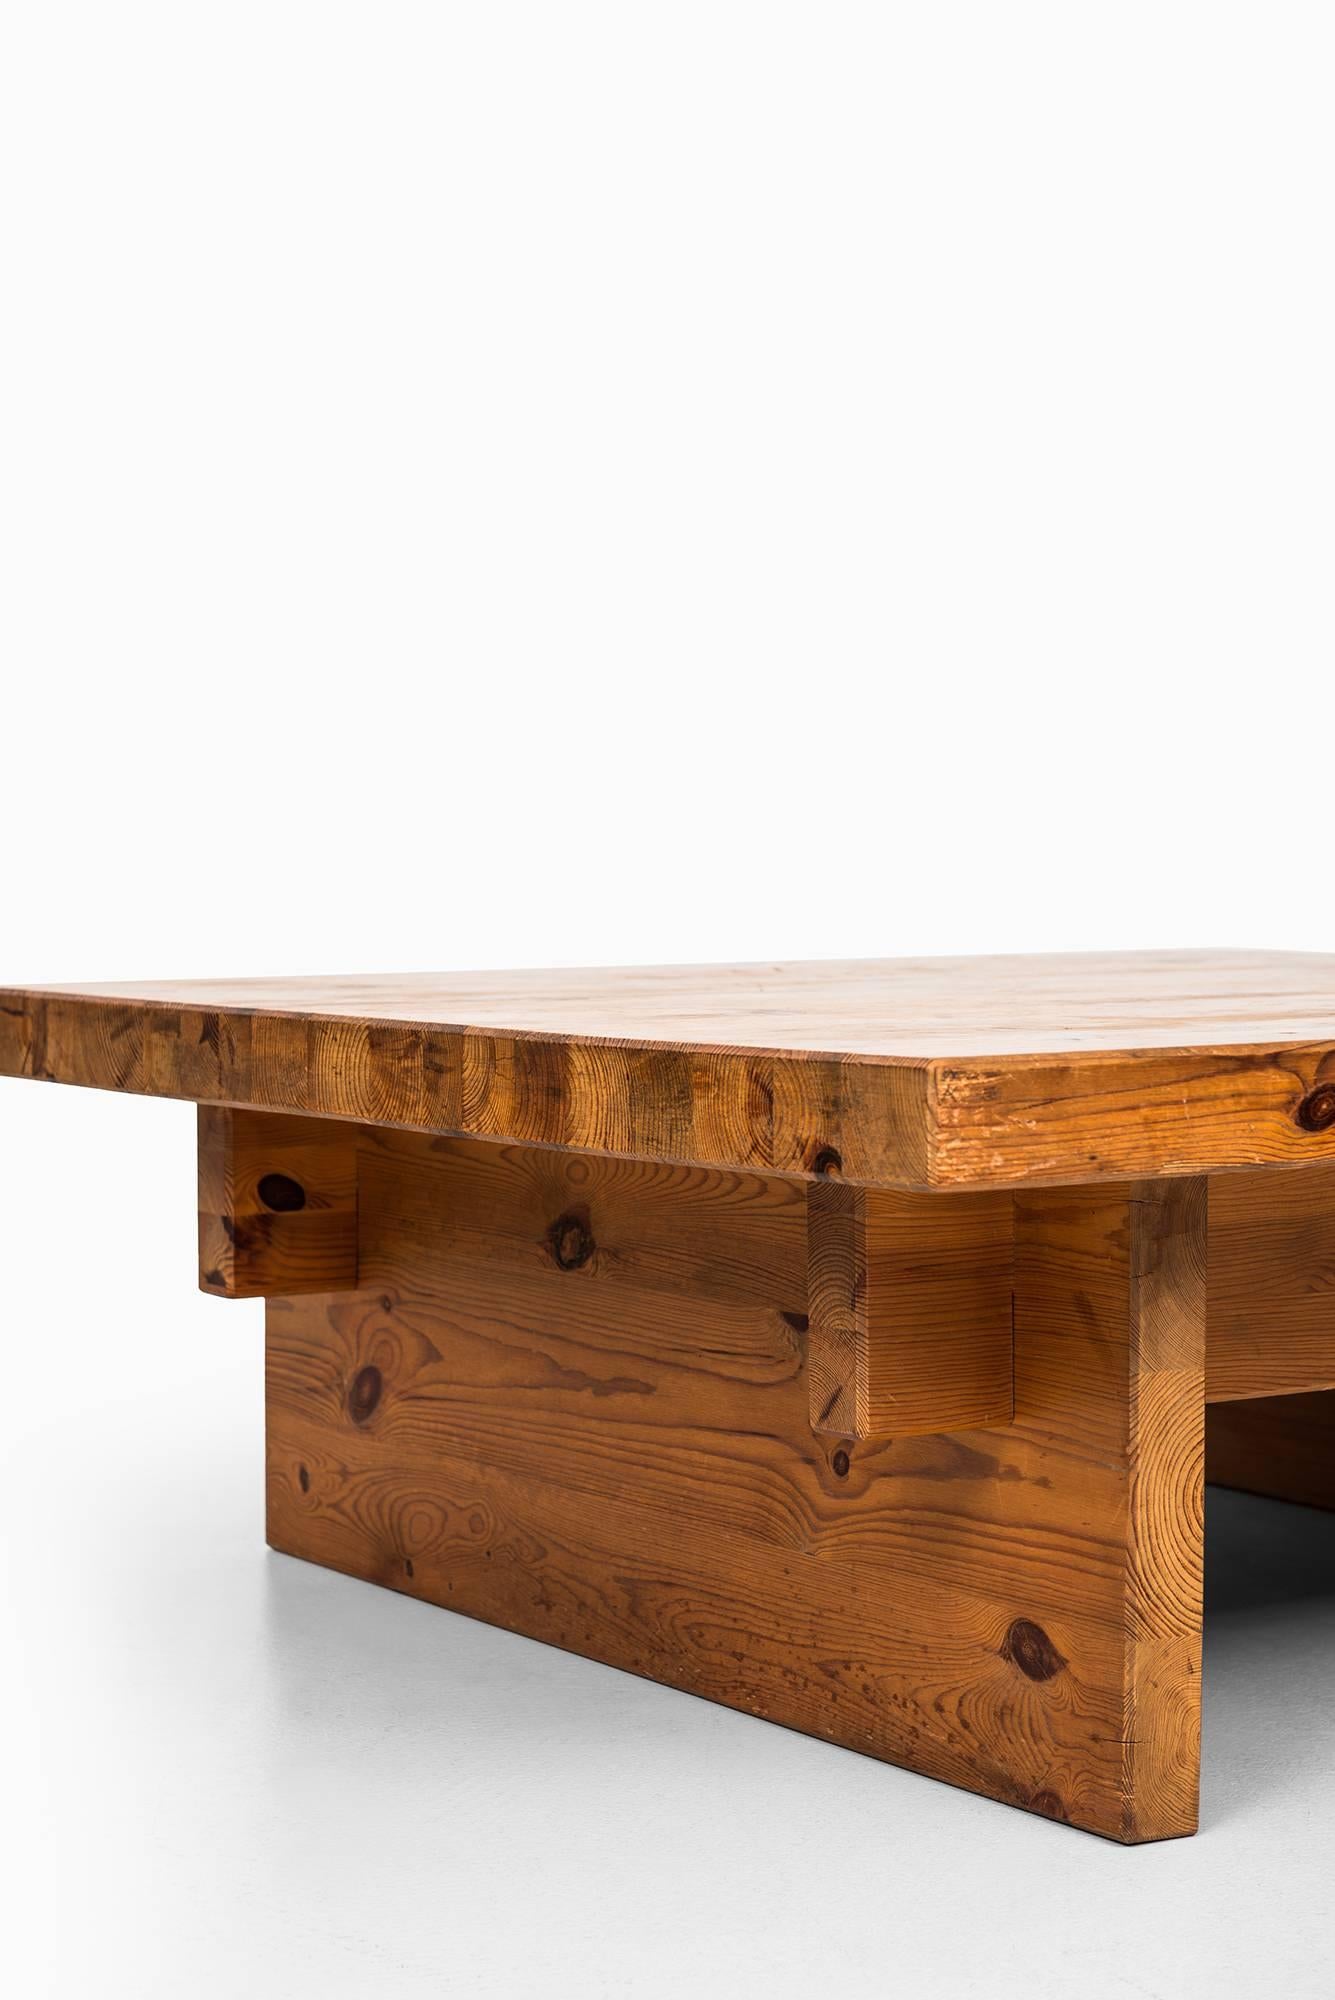 Rare large coffee table in solid pine designed by Roland Wilhelmsson. Produced by Karl Andersson & Söner AB in Sweden.